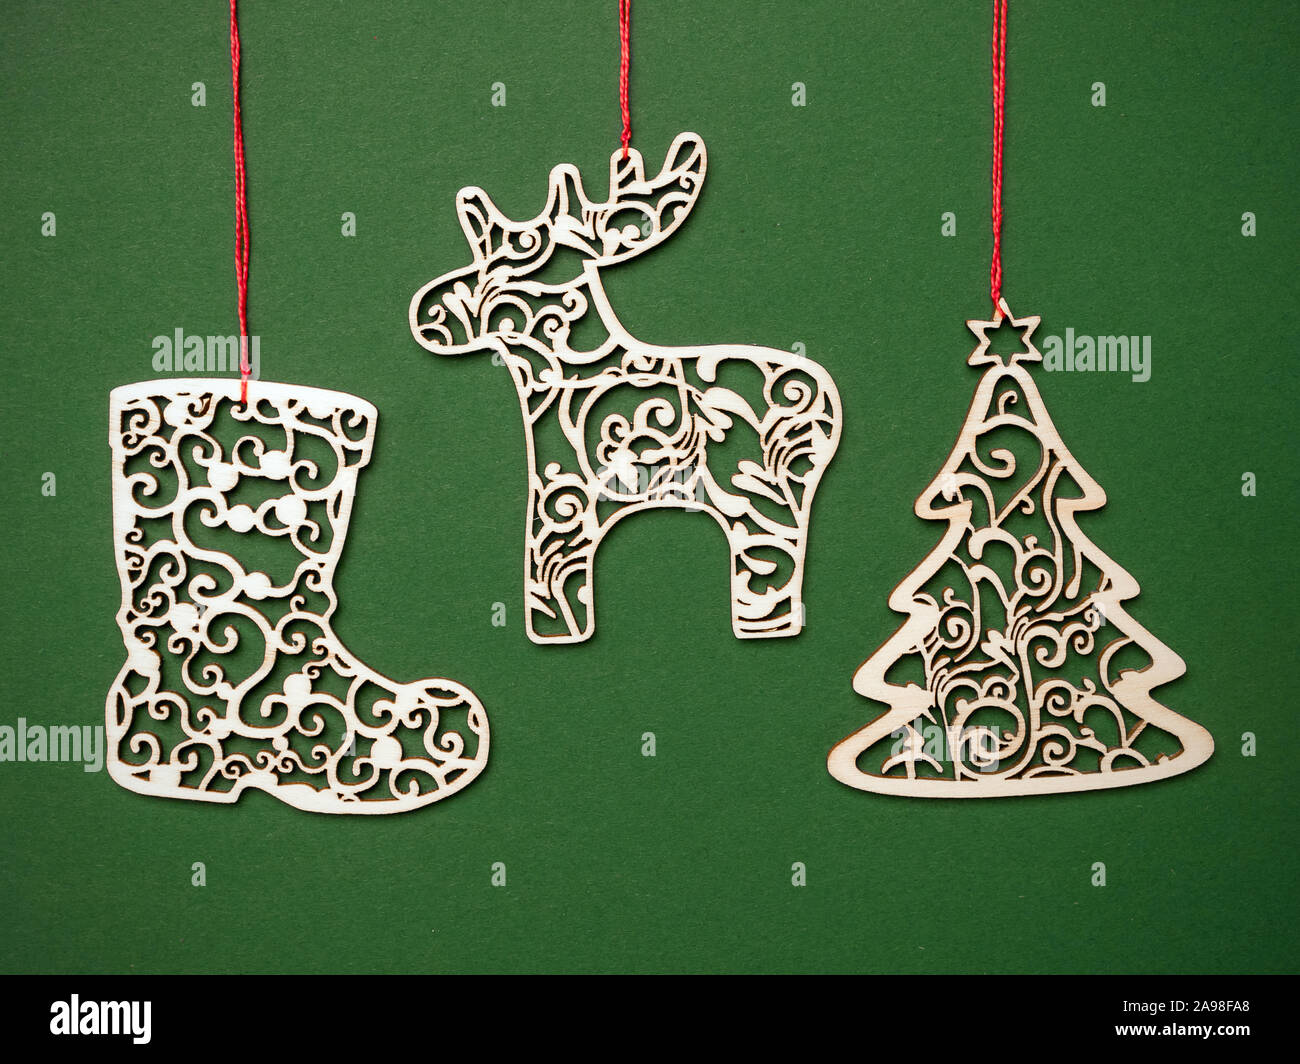 Christmas wooden ornamental cut-out decorations hung on red string against green background Stock Photo